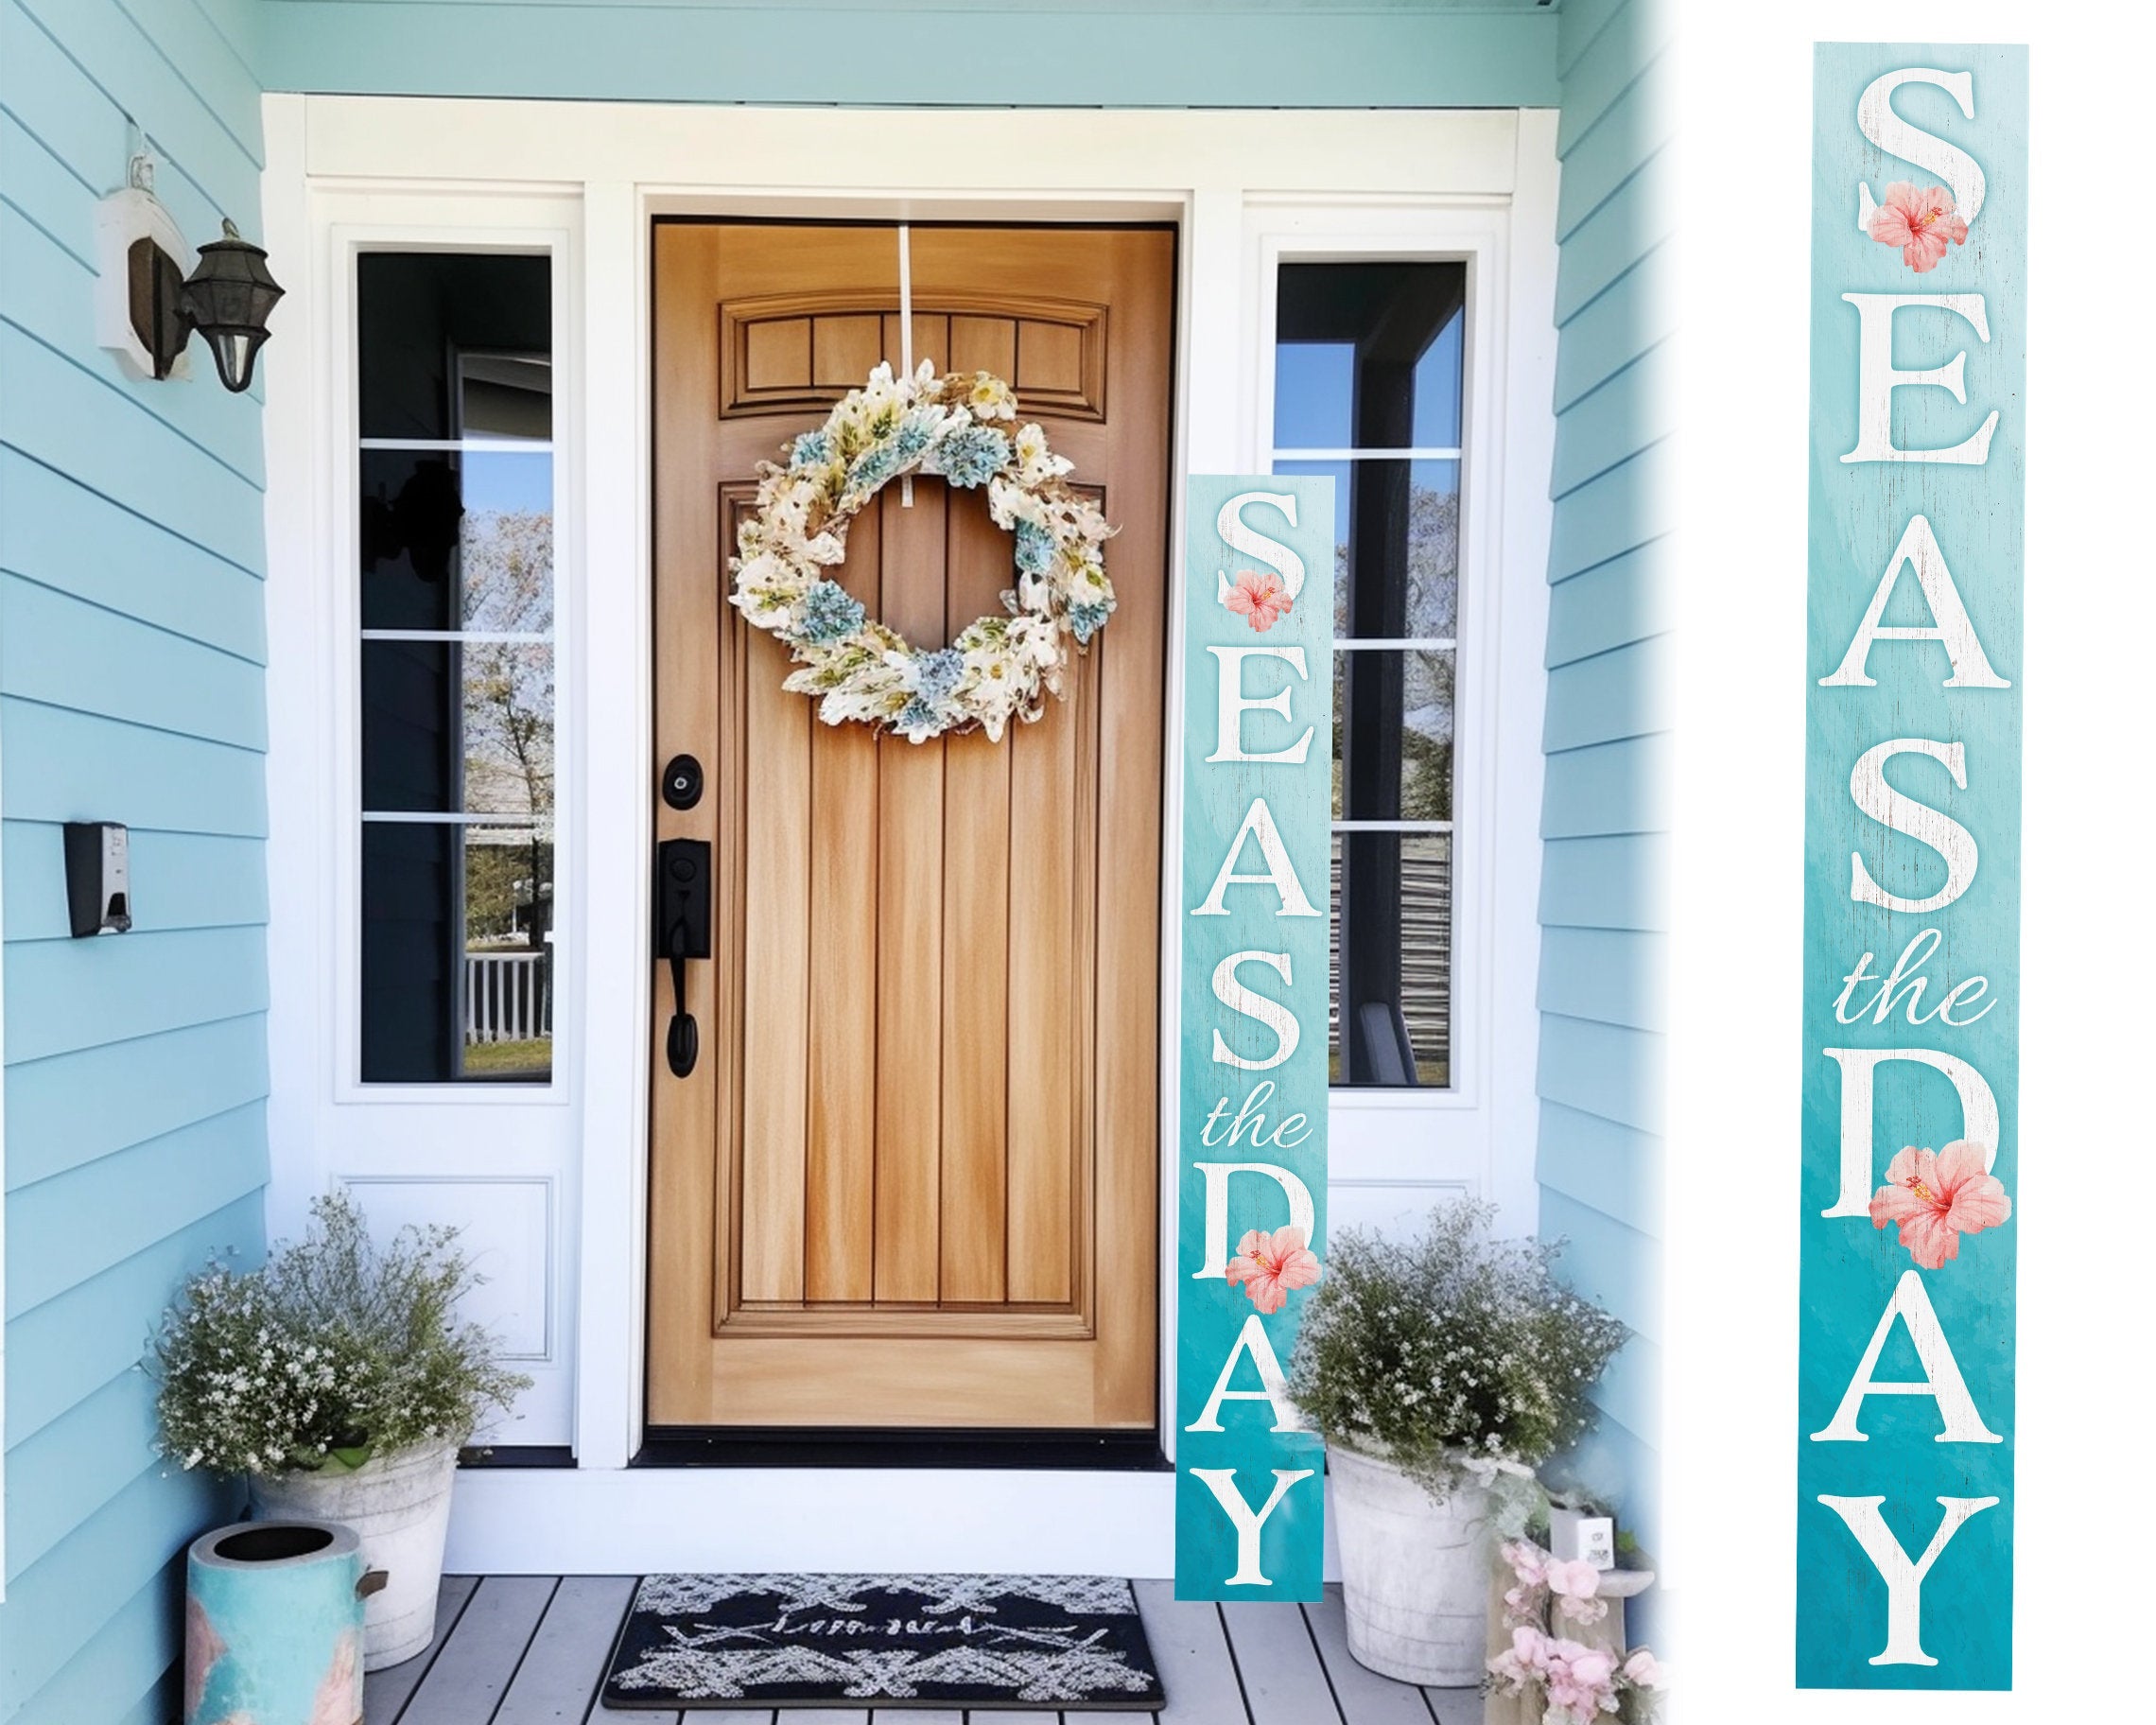 72in-Seas-the-Day-Outdoor-Summer-Sign-|-Front-Door-Porch-Sign-|-Coastal-Summer-Welcome-Sign-|-Farmhouse-Home-Decorations-